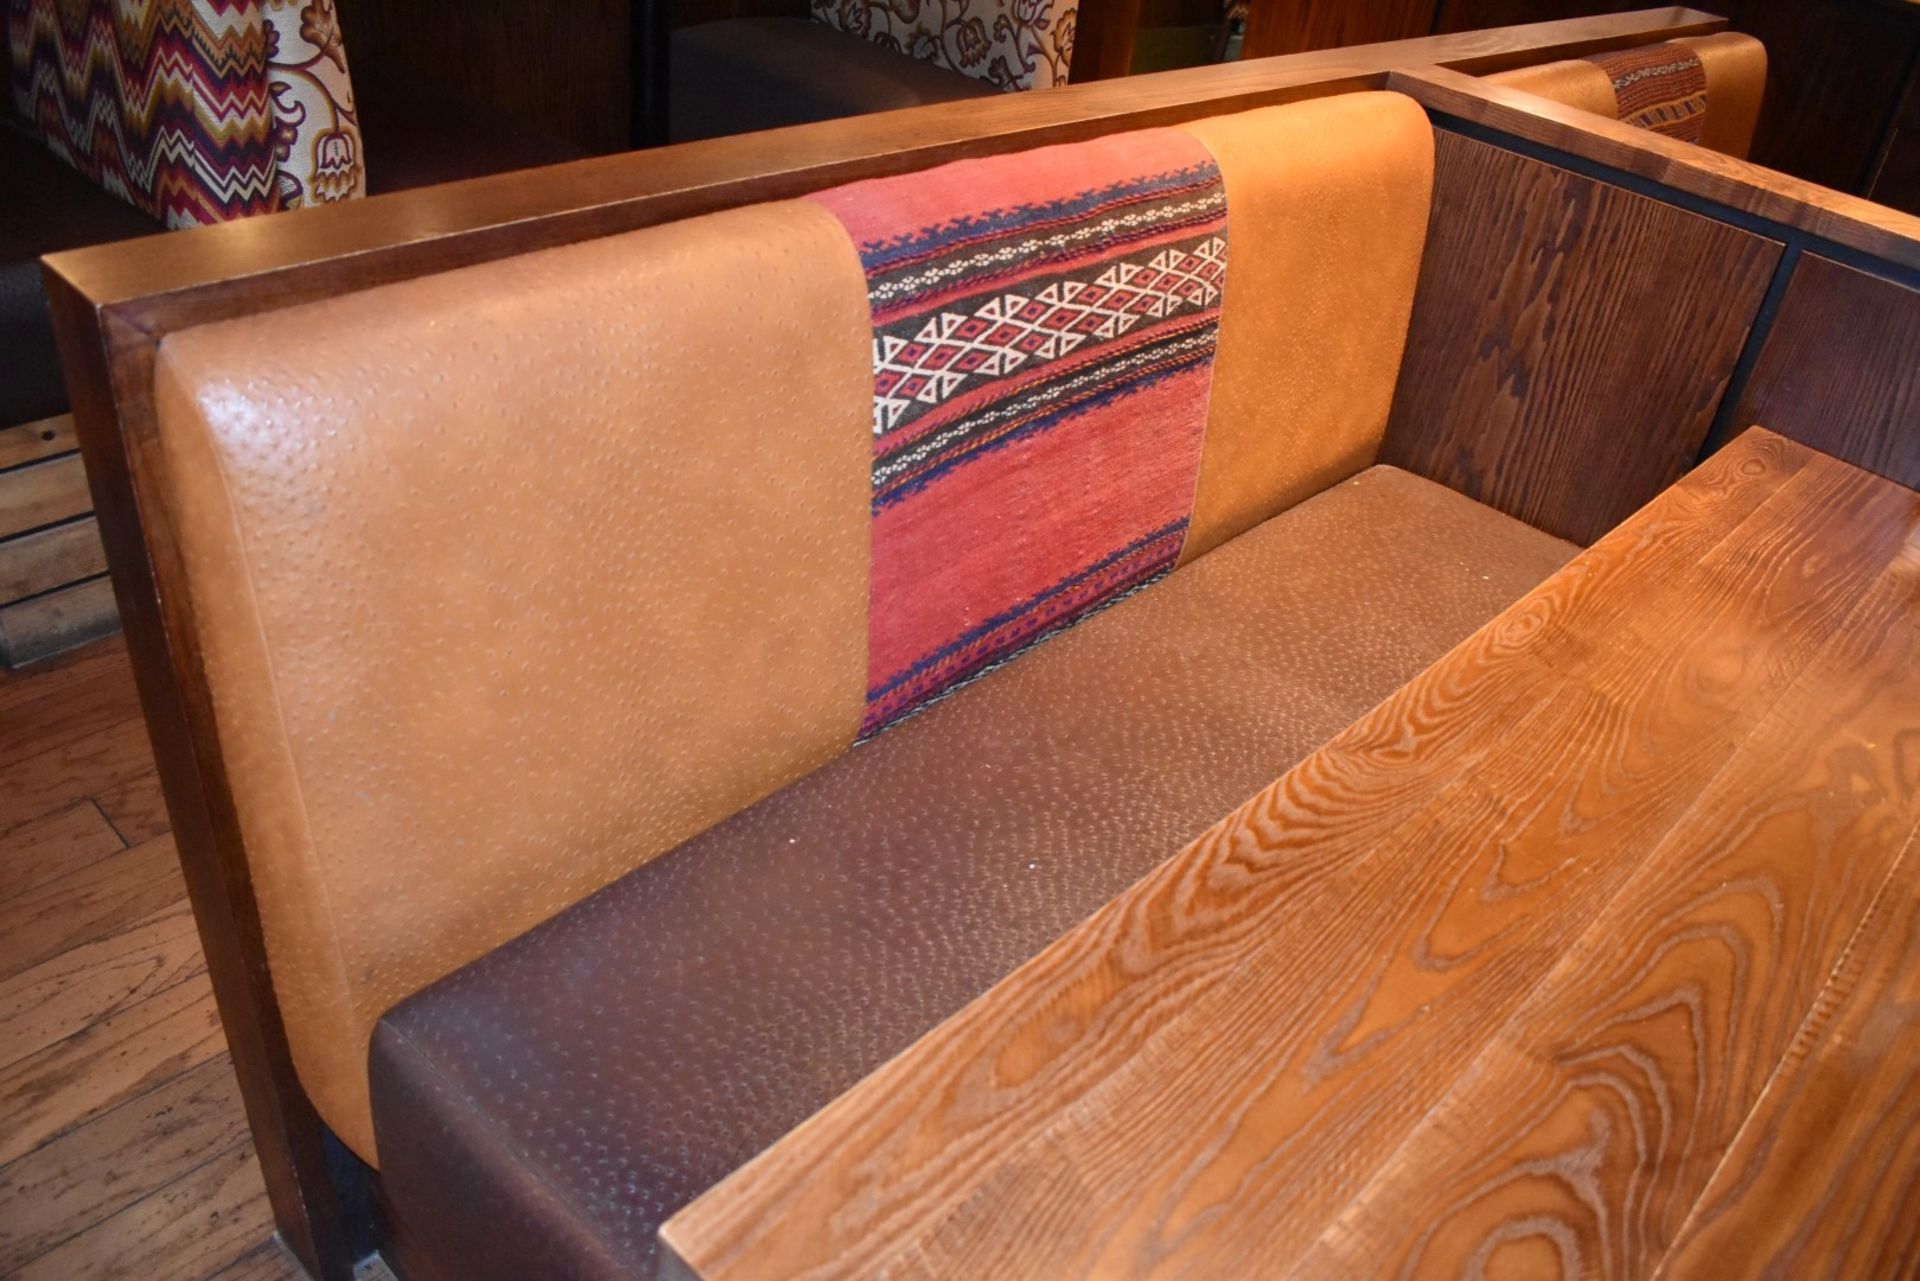 15-Pieces Of Restaurant Booth Seating Of Varying Length - Image 11 of 22